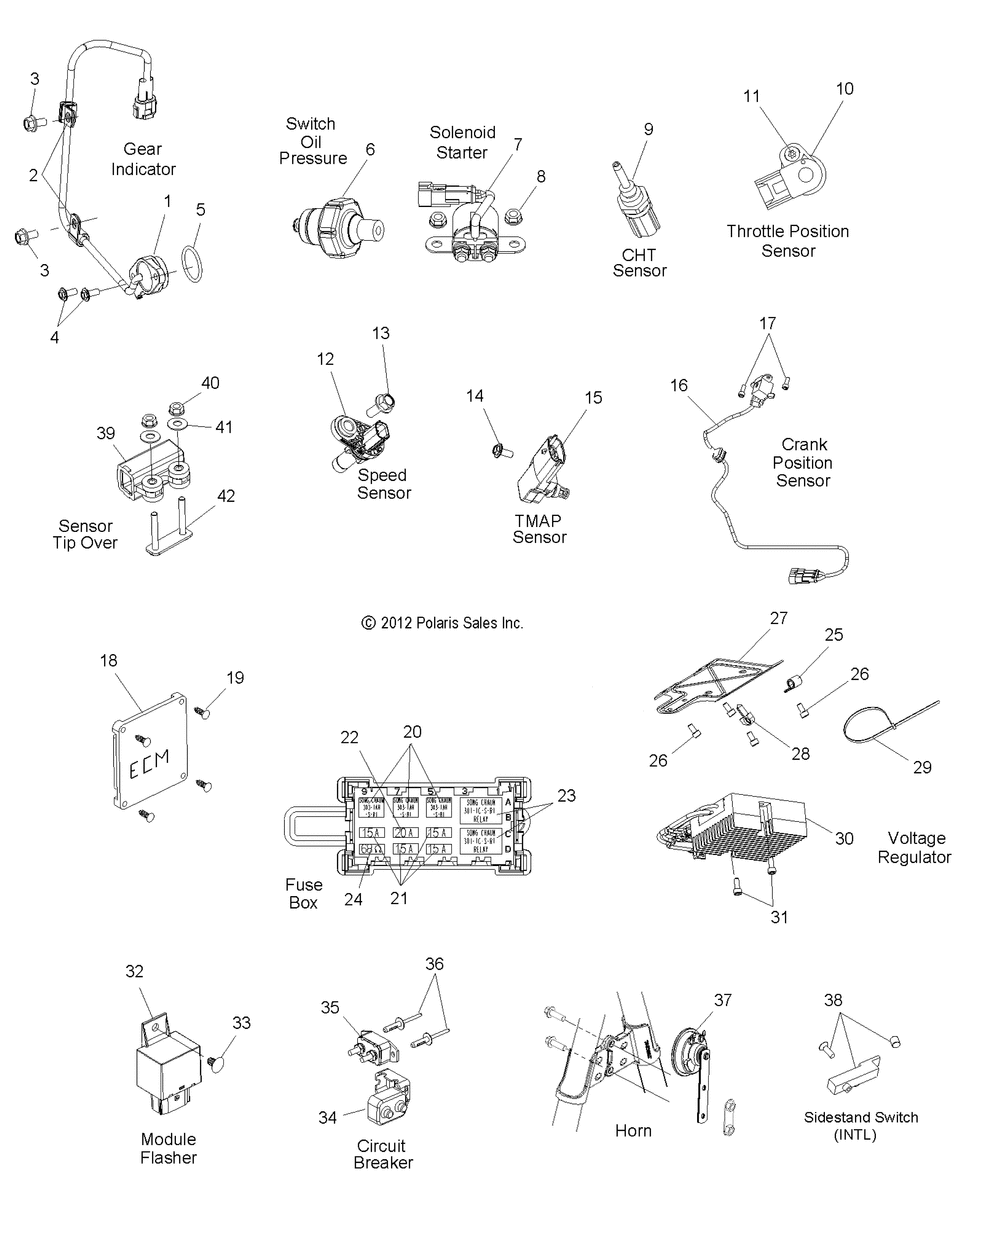 Electrical switches sensors and components - v14wb36